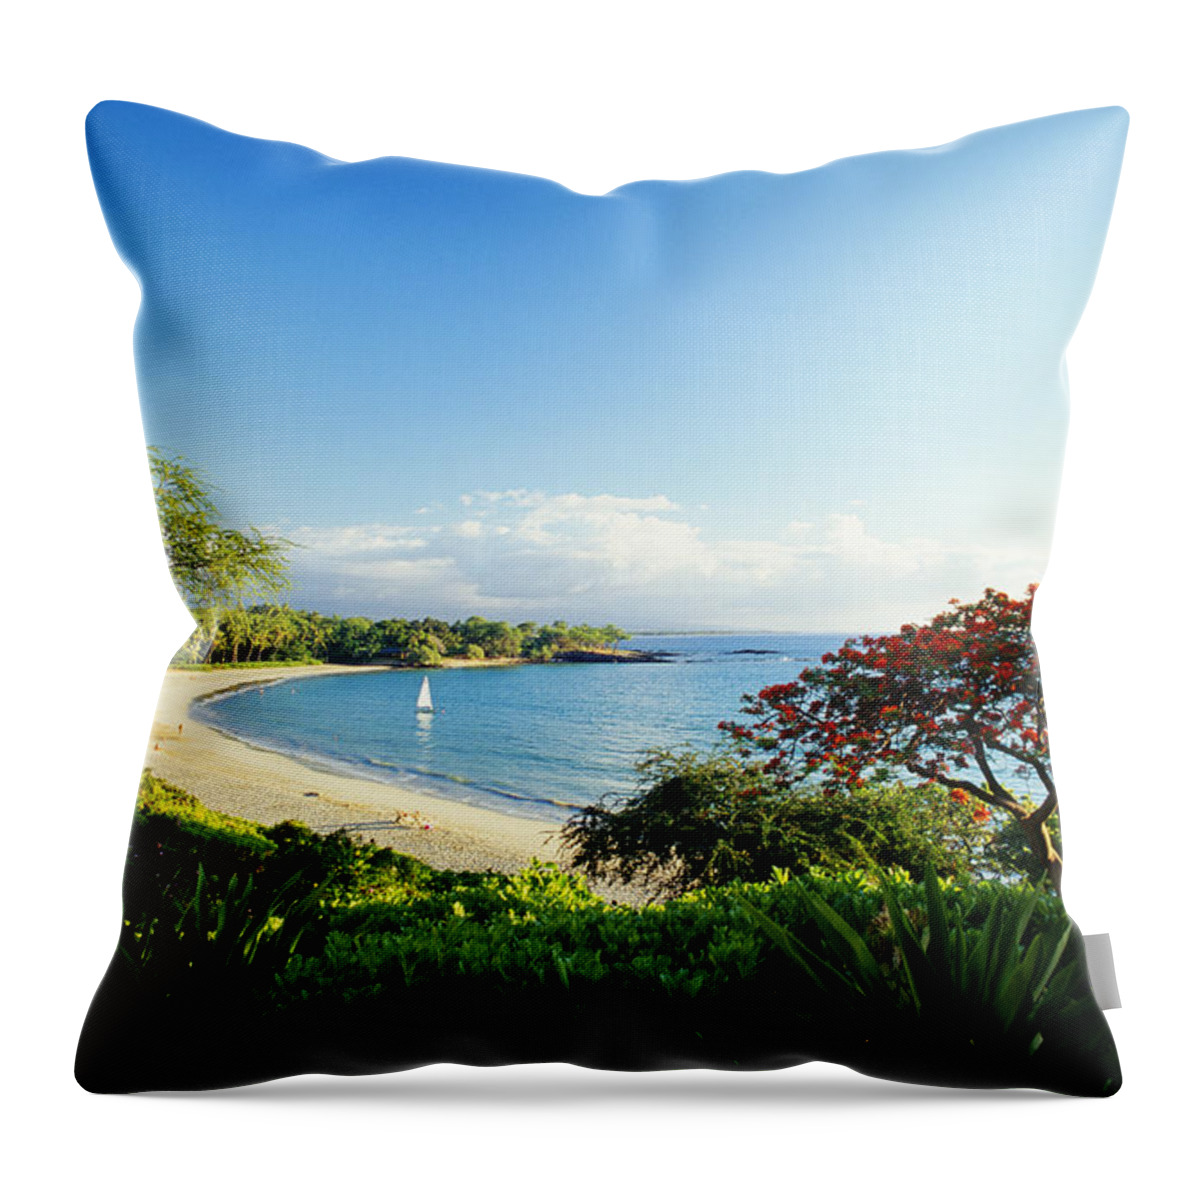 Afternoon Throw Pillow featuring the photograph Mauna Kea Beach #1 by Peter French - Printscapes